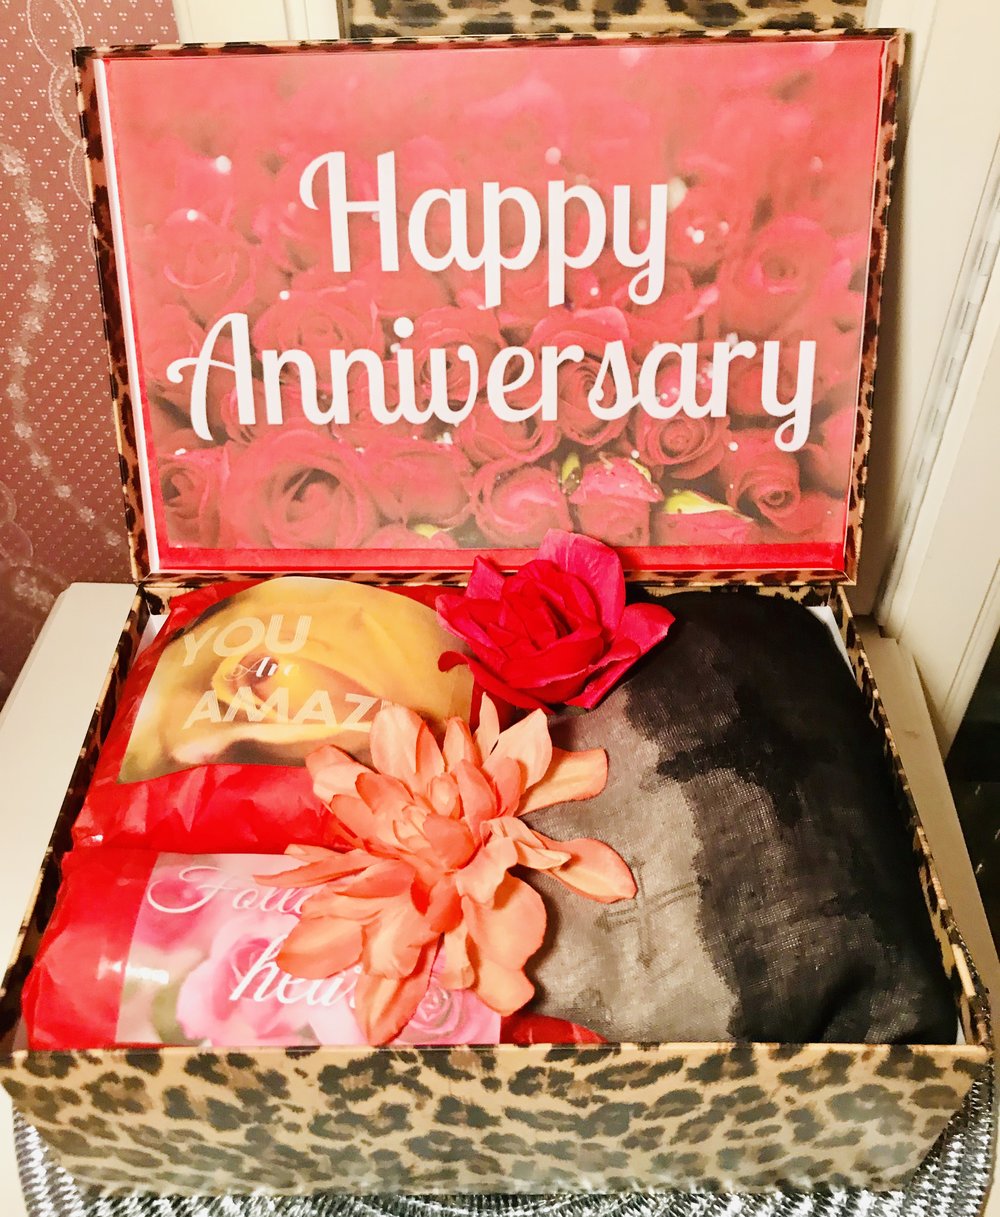 One year anniversary care package  Boyfriend anniversary gifts, 1 year  anniversary gifts, Anniversary care package